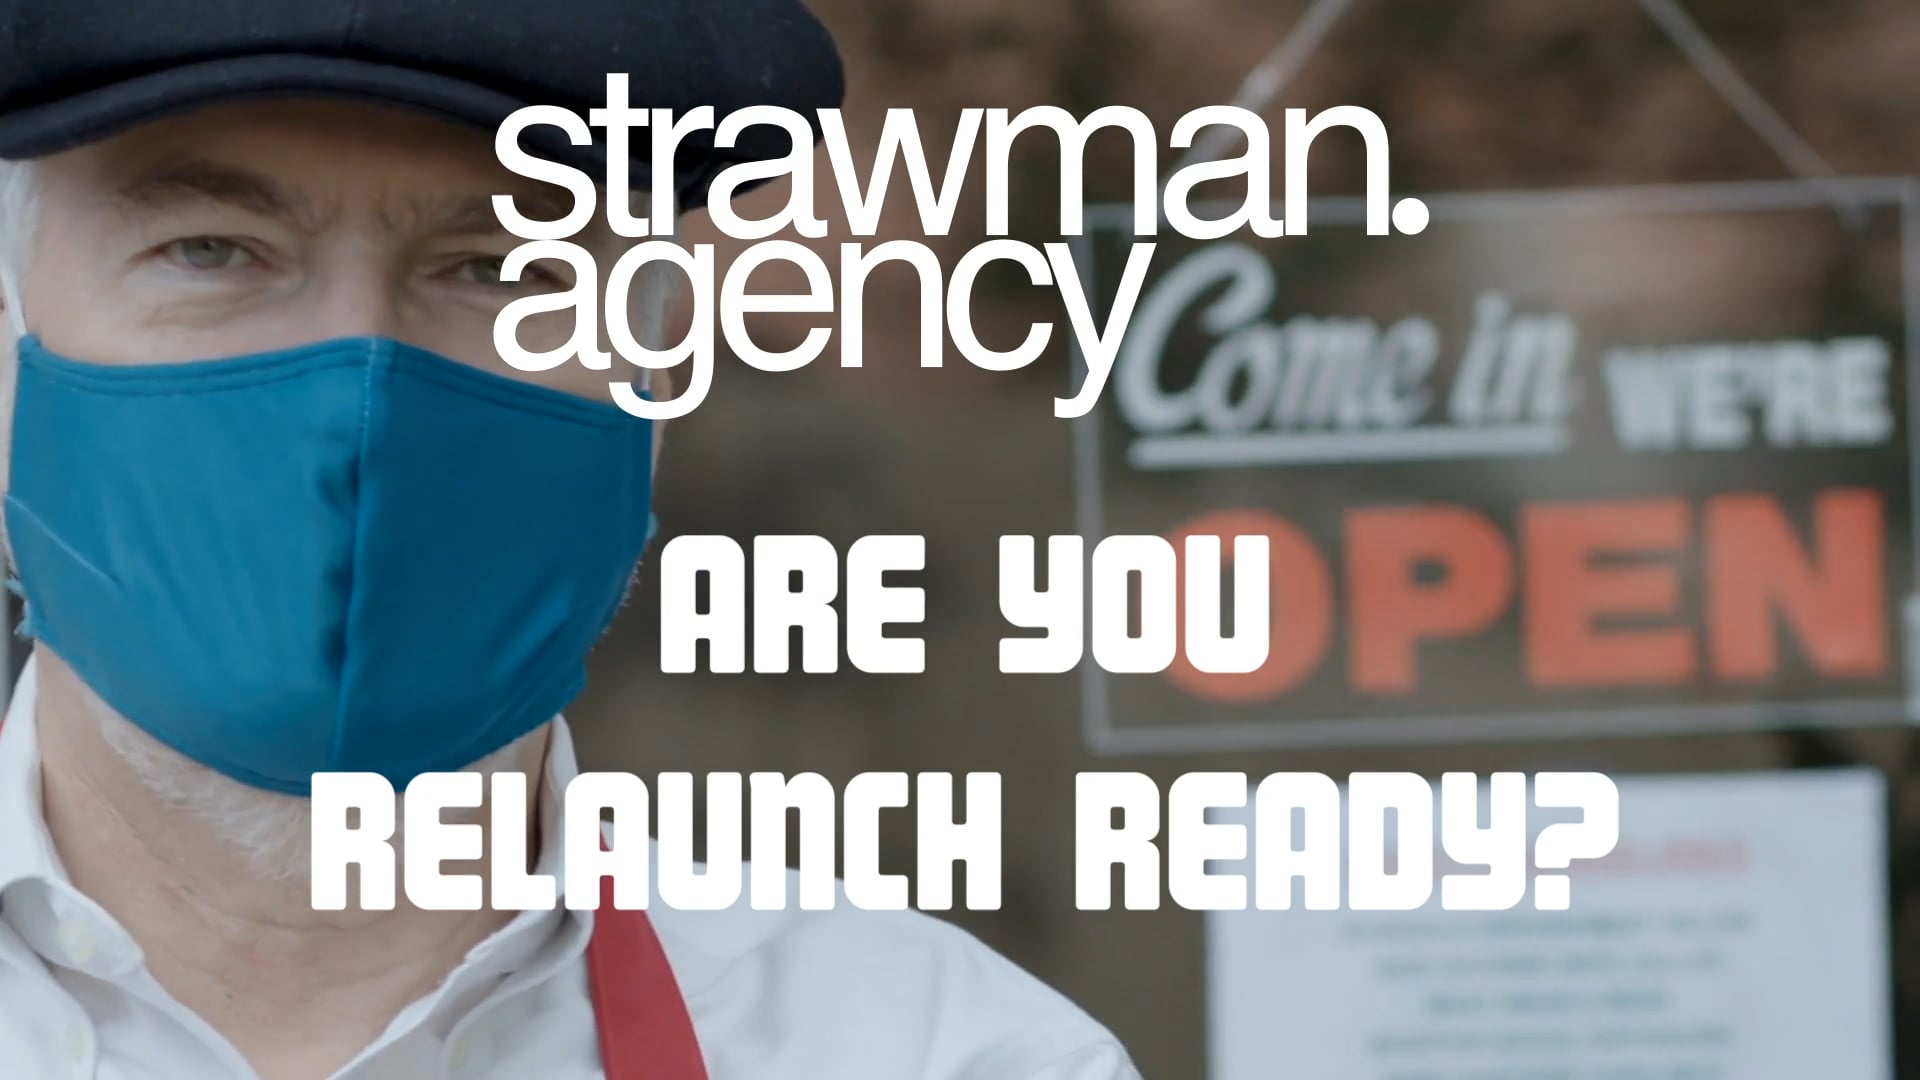 ARE YOU RELAUNCH READY?